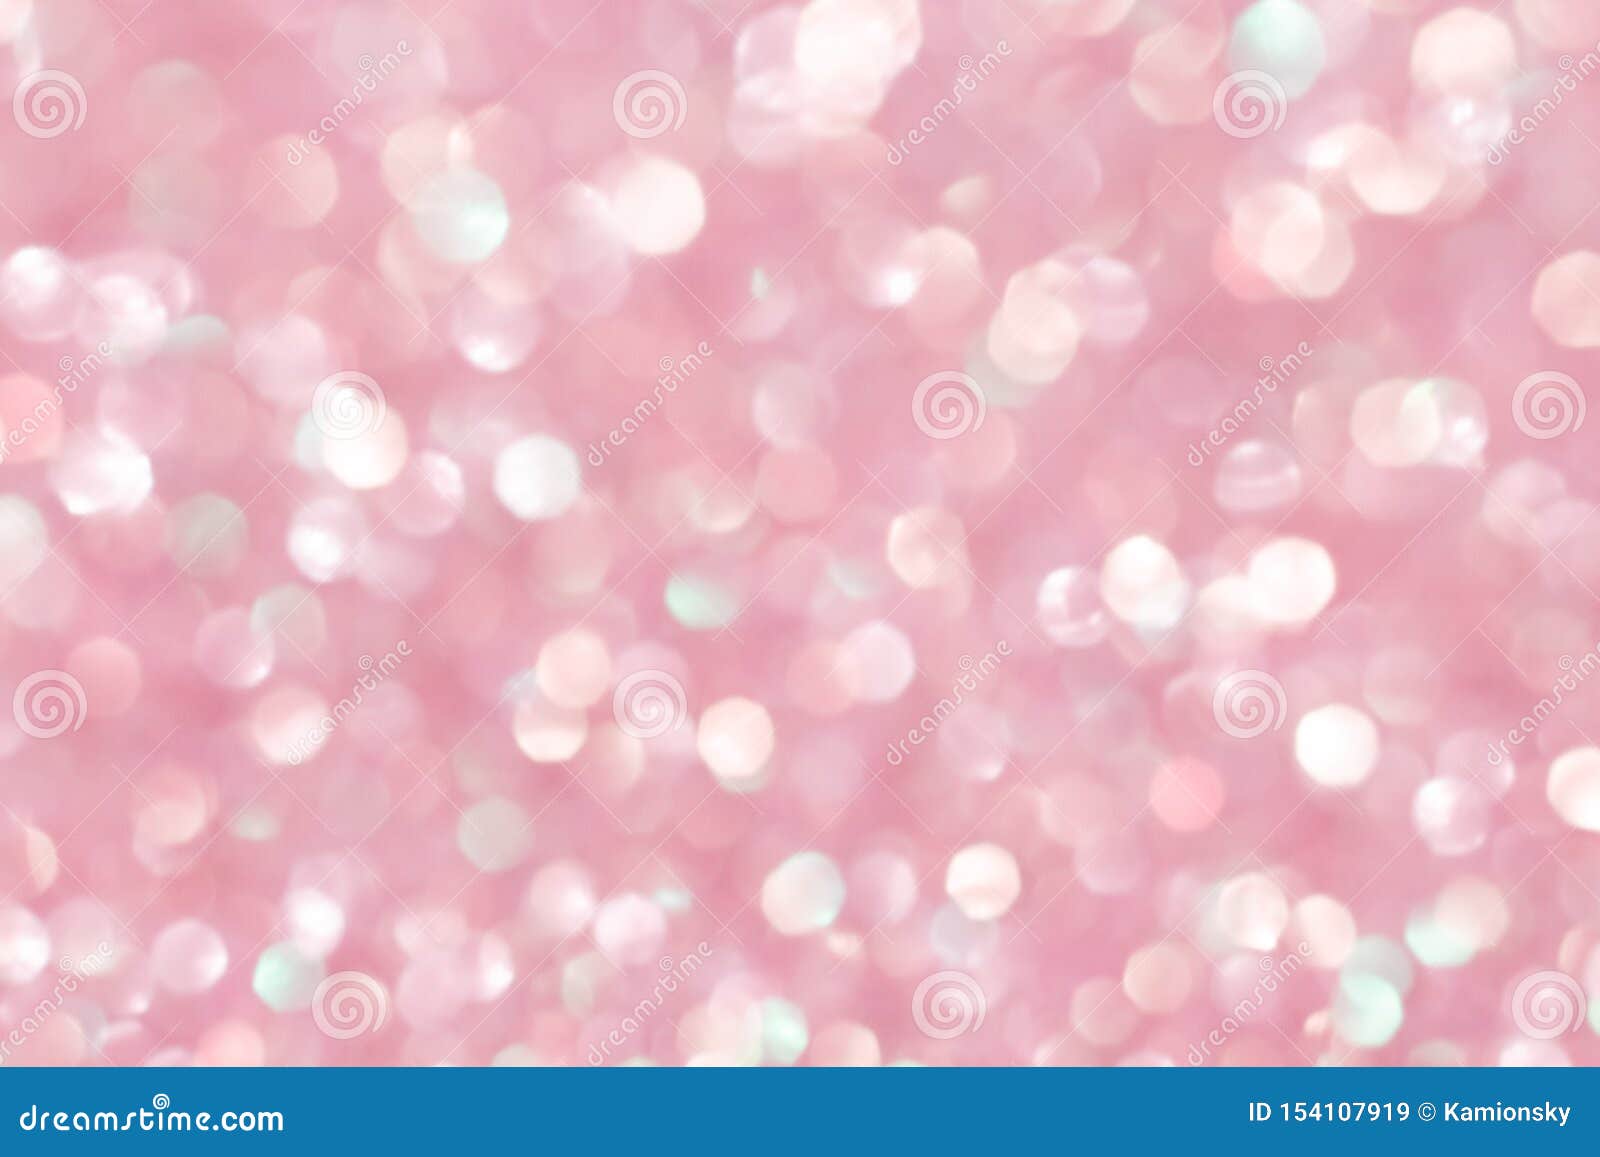 Beautiful Pink Bokeh Background for a Wedding Album Stock Image - Image of  light, card: 154107919